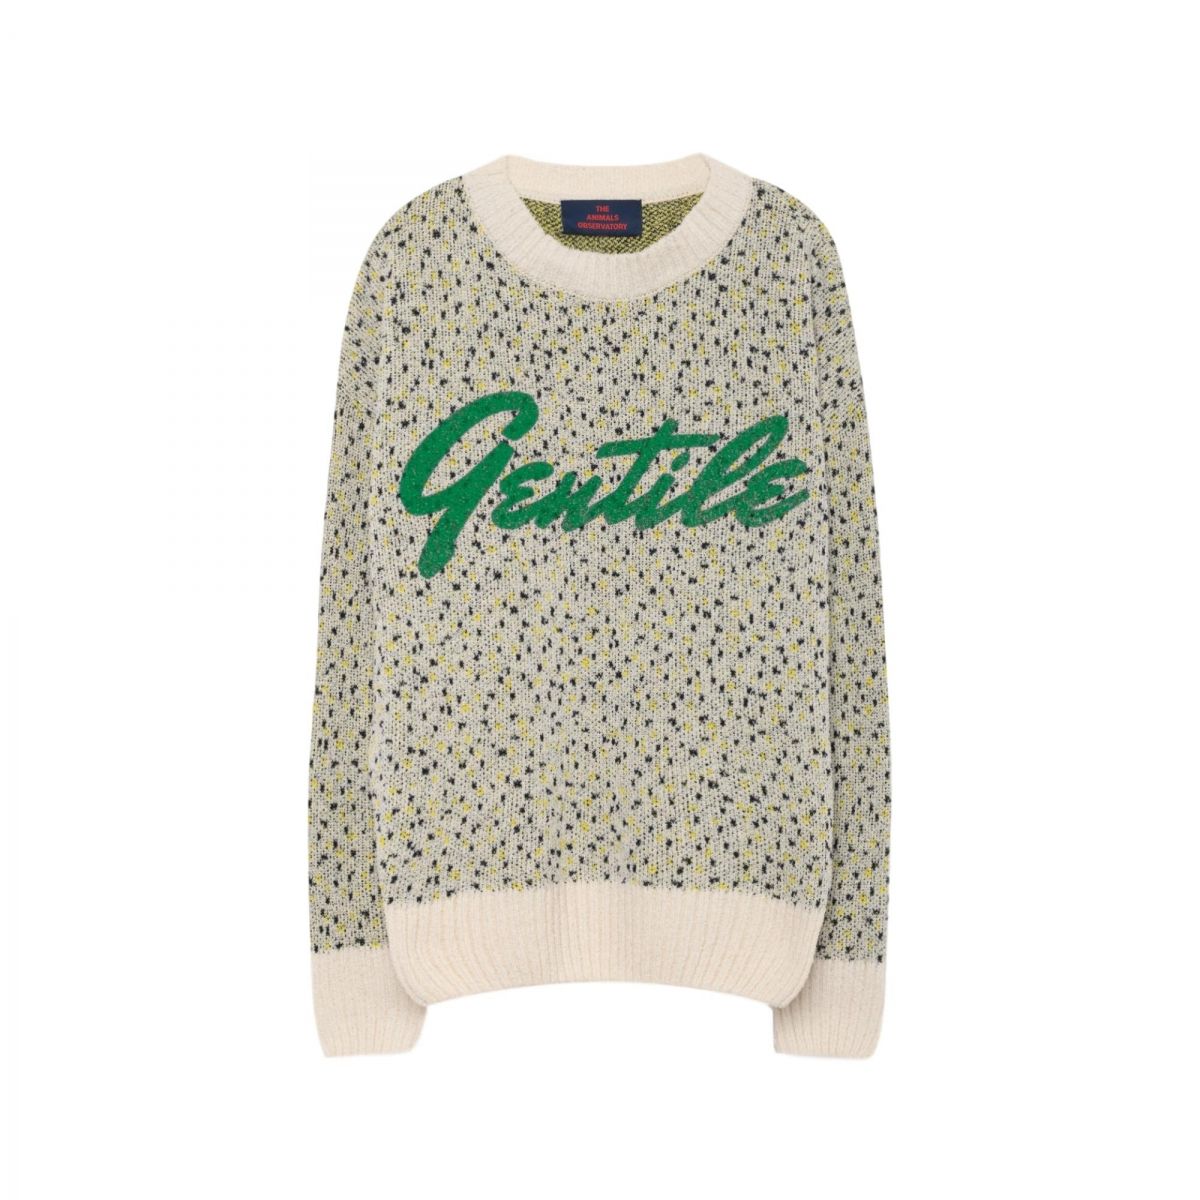 The Animals Observatory Gentile Bull Kids Sweater green 000943